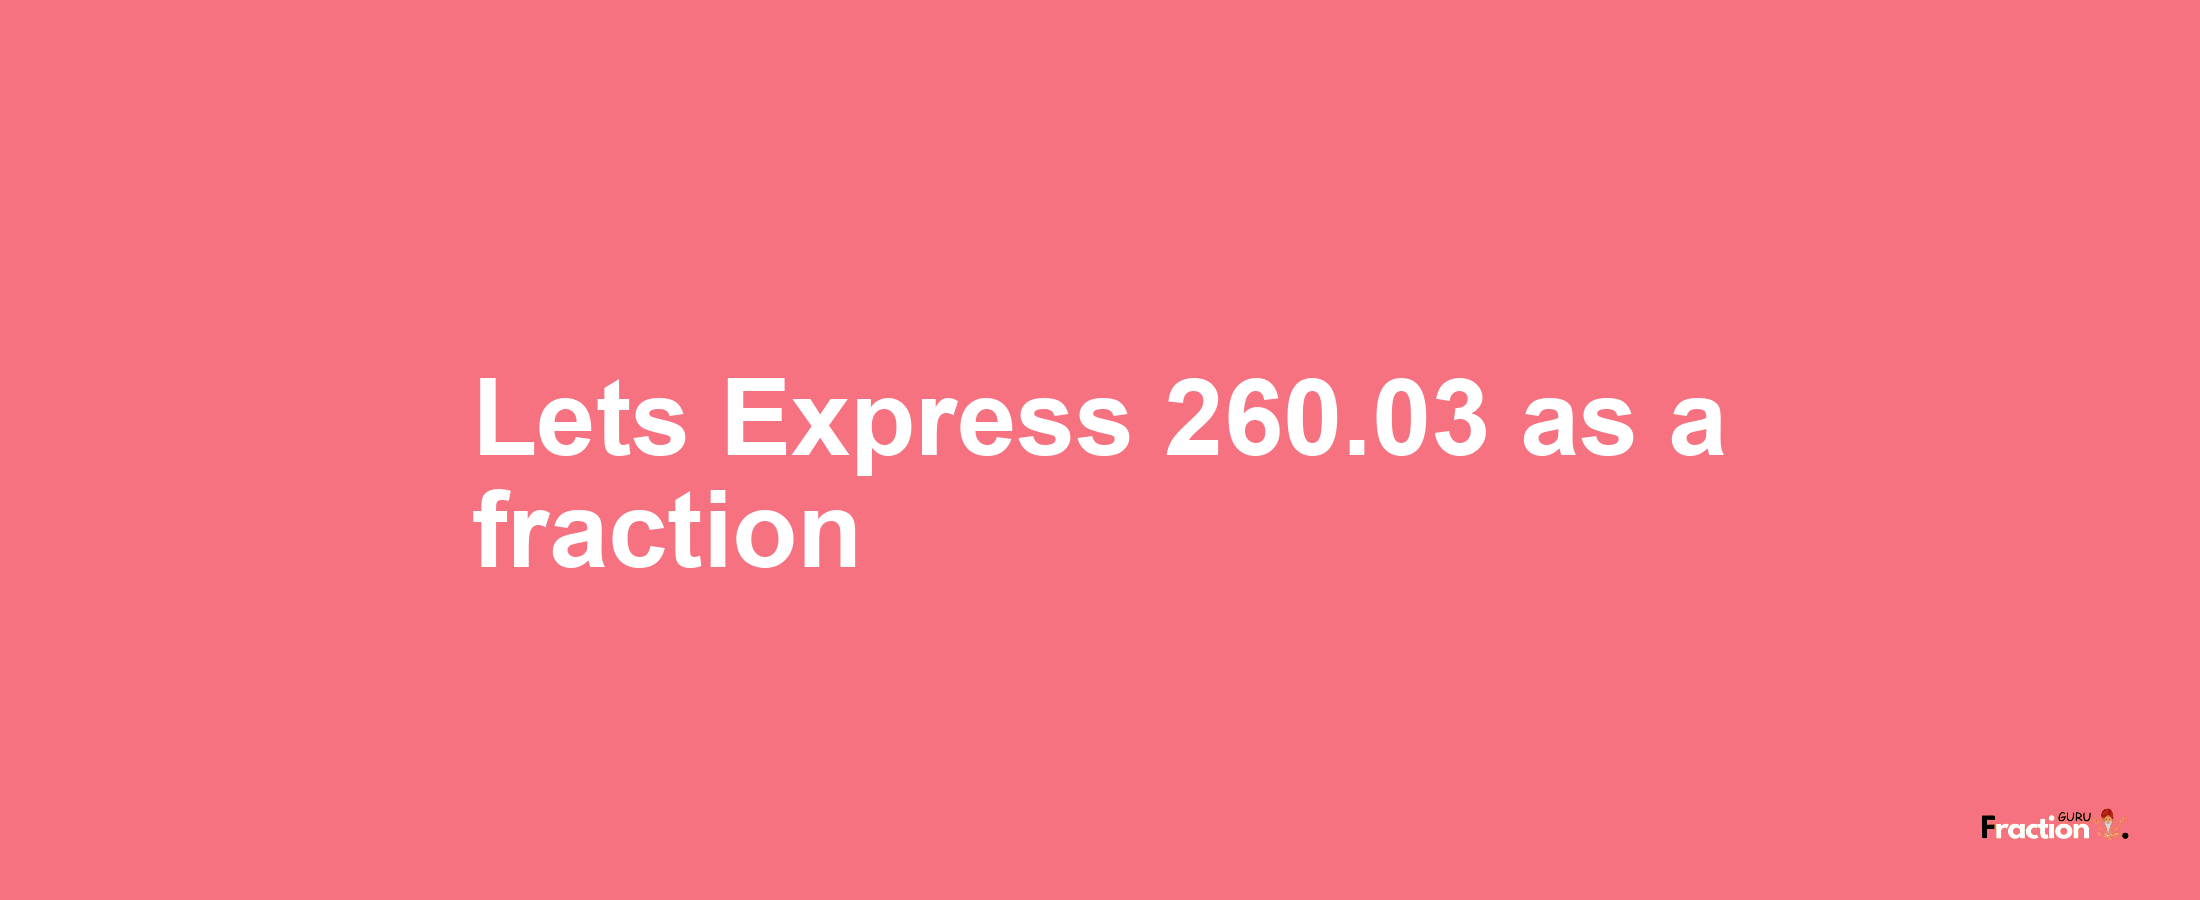 Lets Express 260.03 as afraction